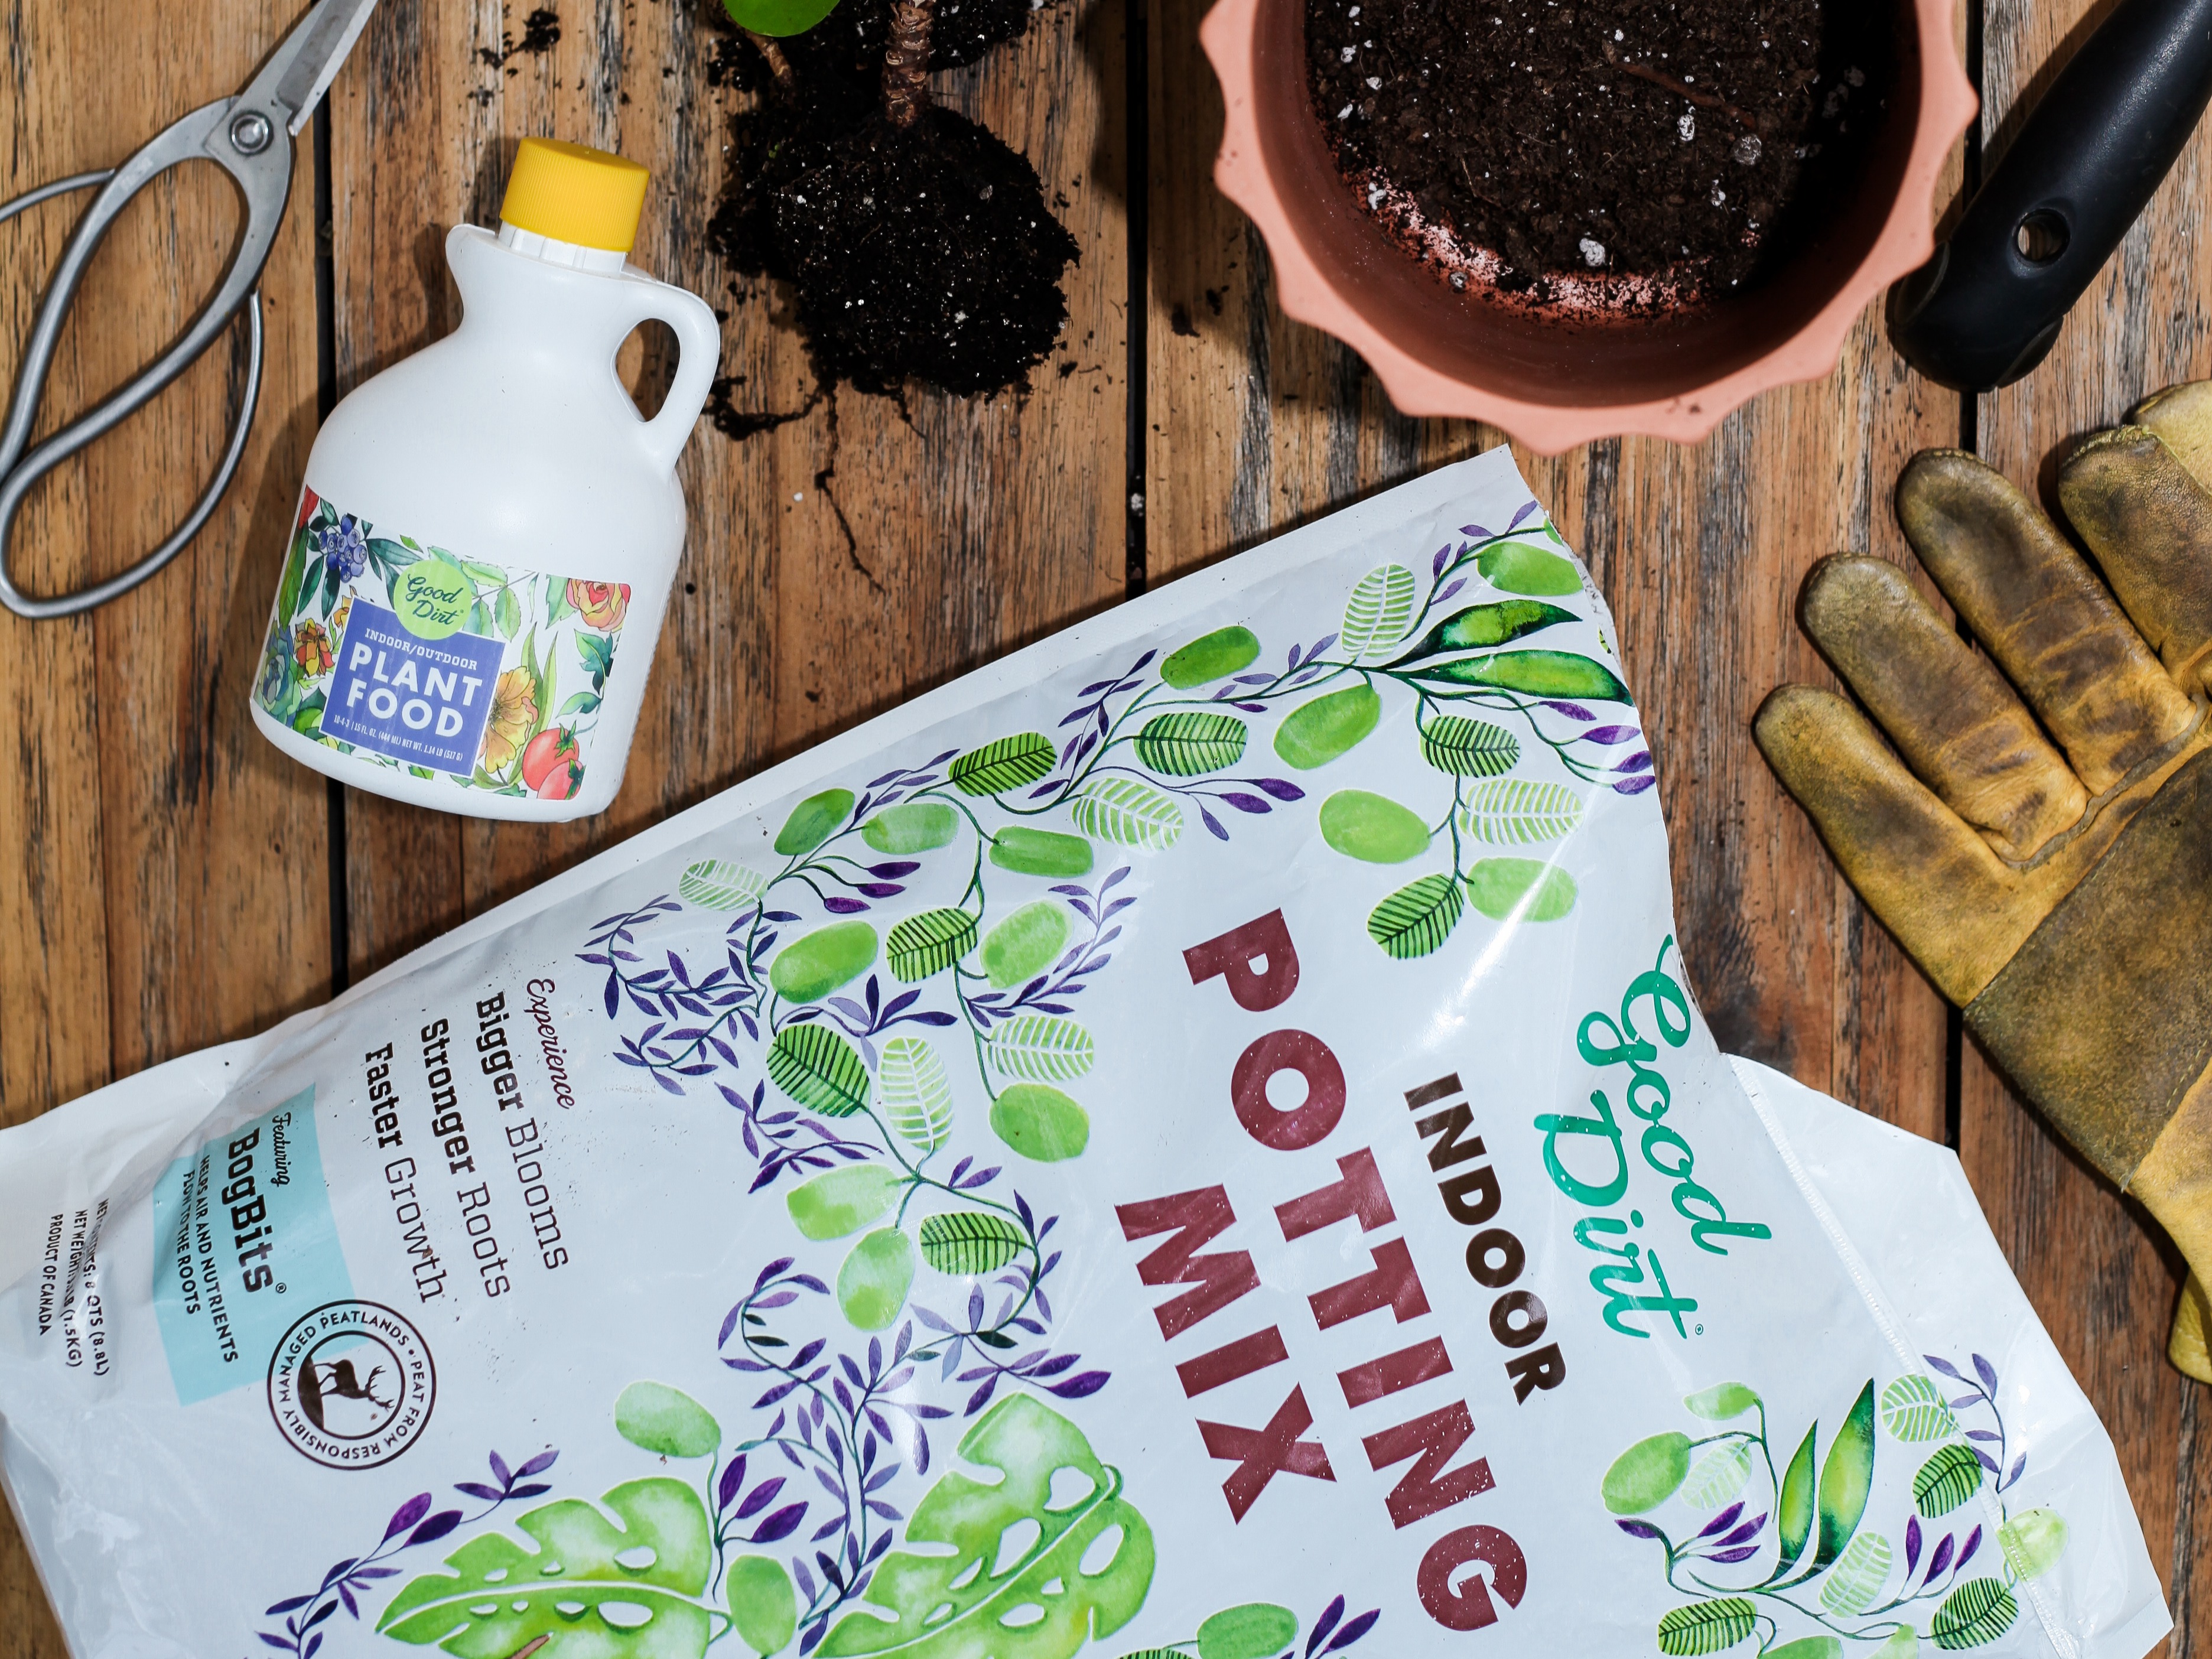 Image of Good Dirt Indoor Potting Mix bag and Good Dirt Plant food on wood deck with gardening gloves and pots